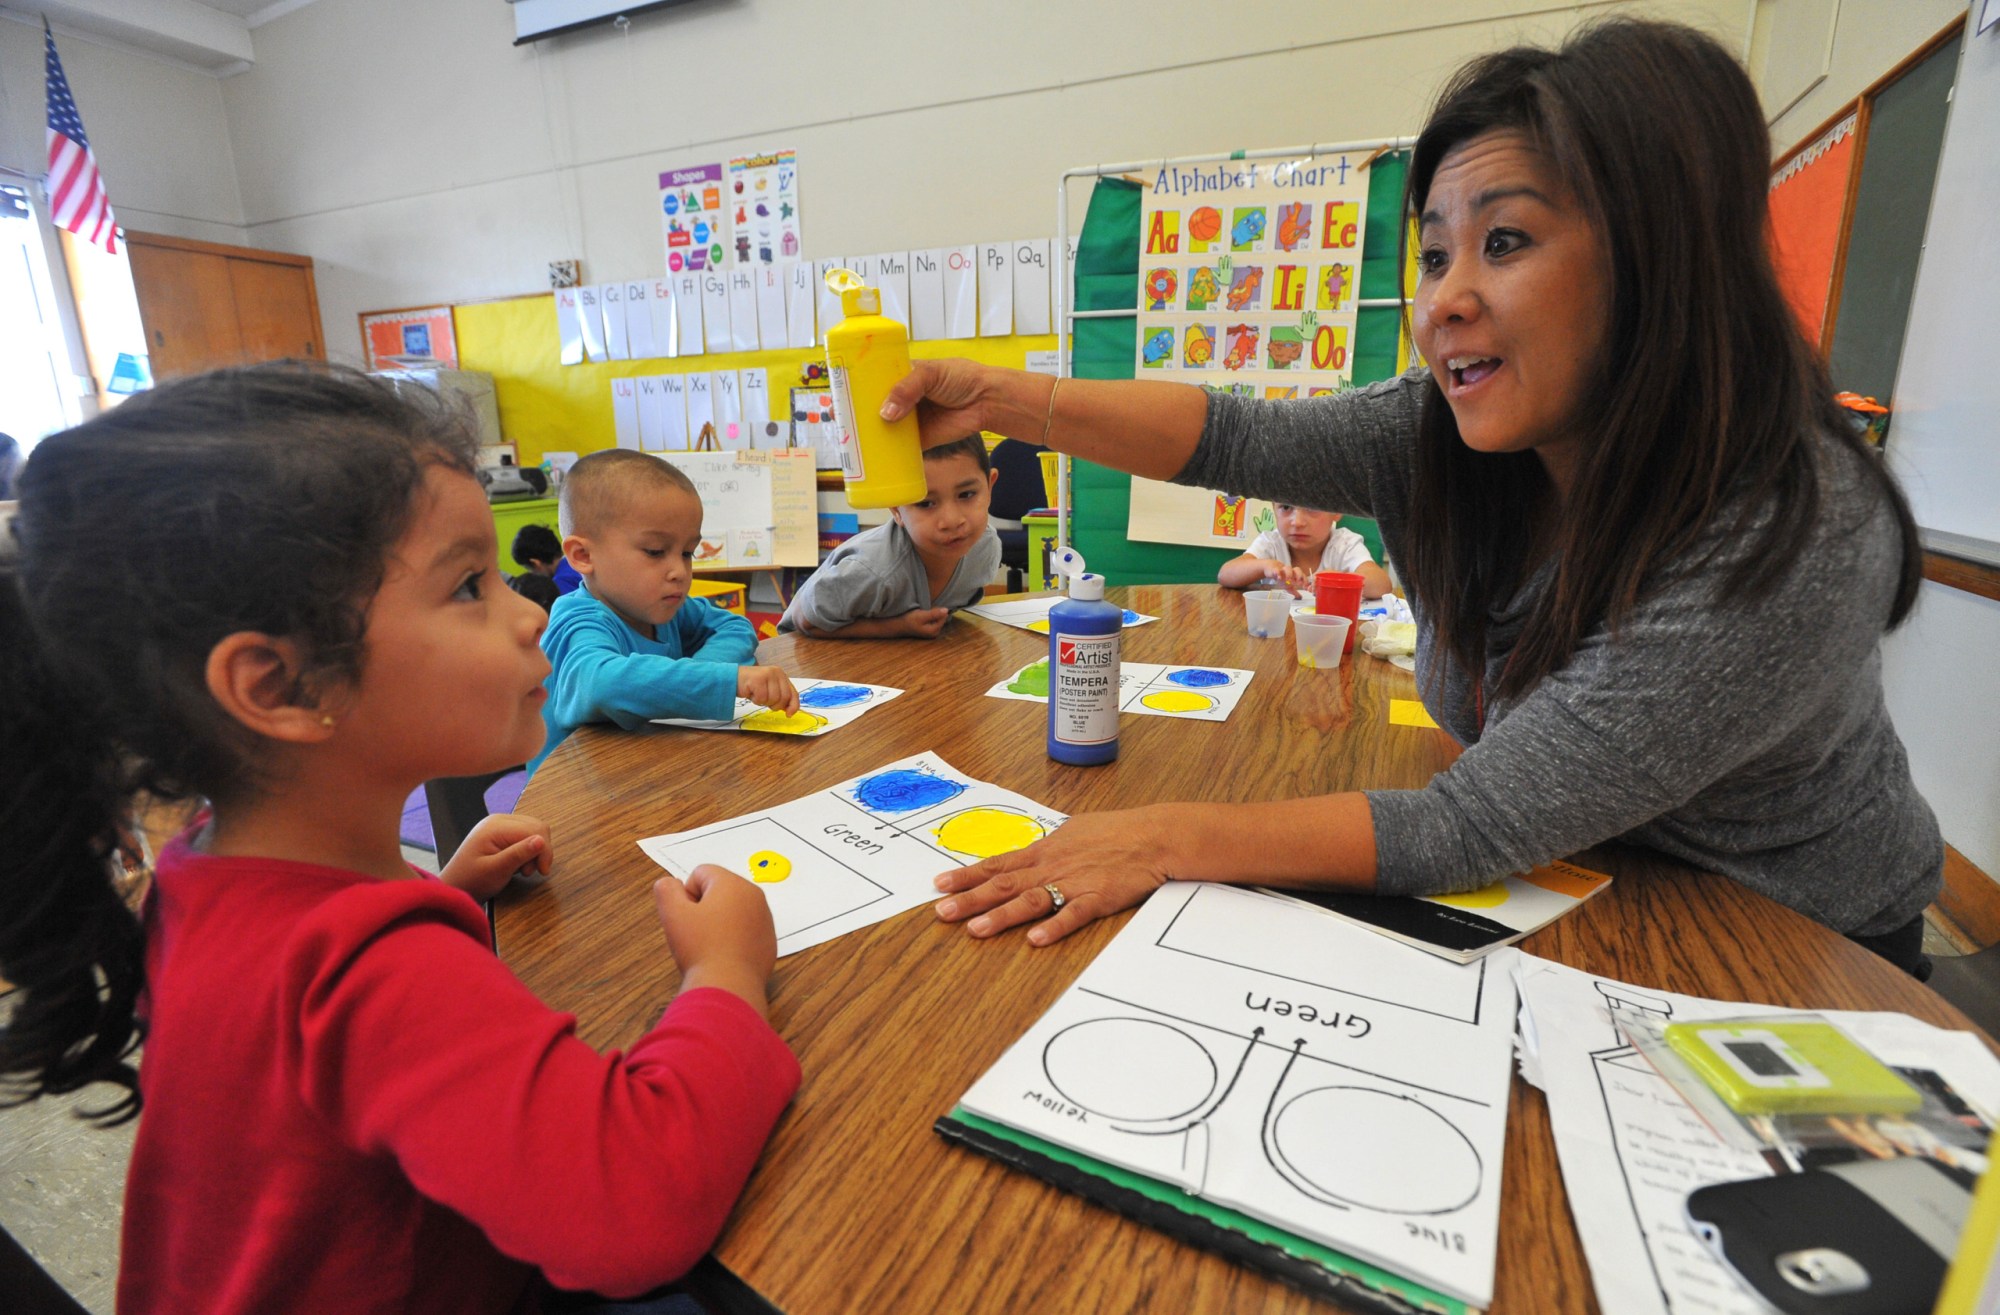 A teacher works with several students at a learning center in Long Beach, California, October 2013. (Getty/Digital First Media/Torrance Daily News/Scott Varley)